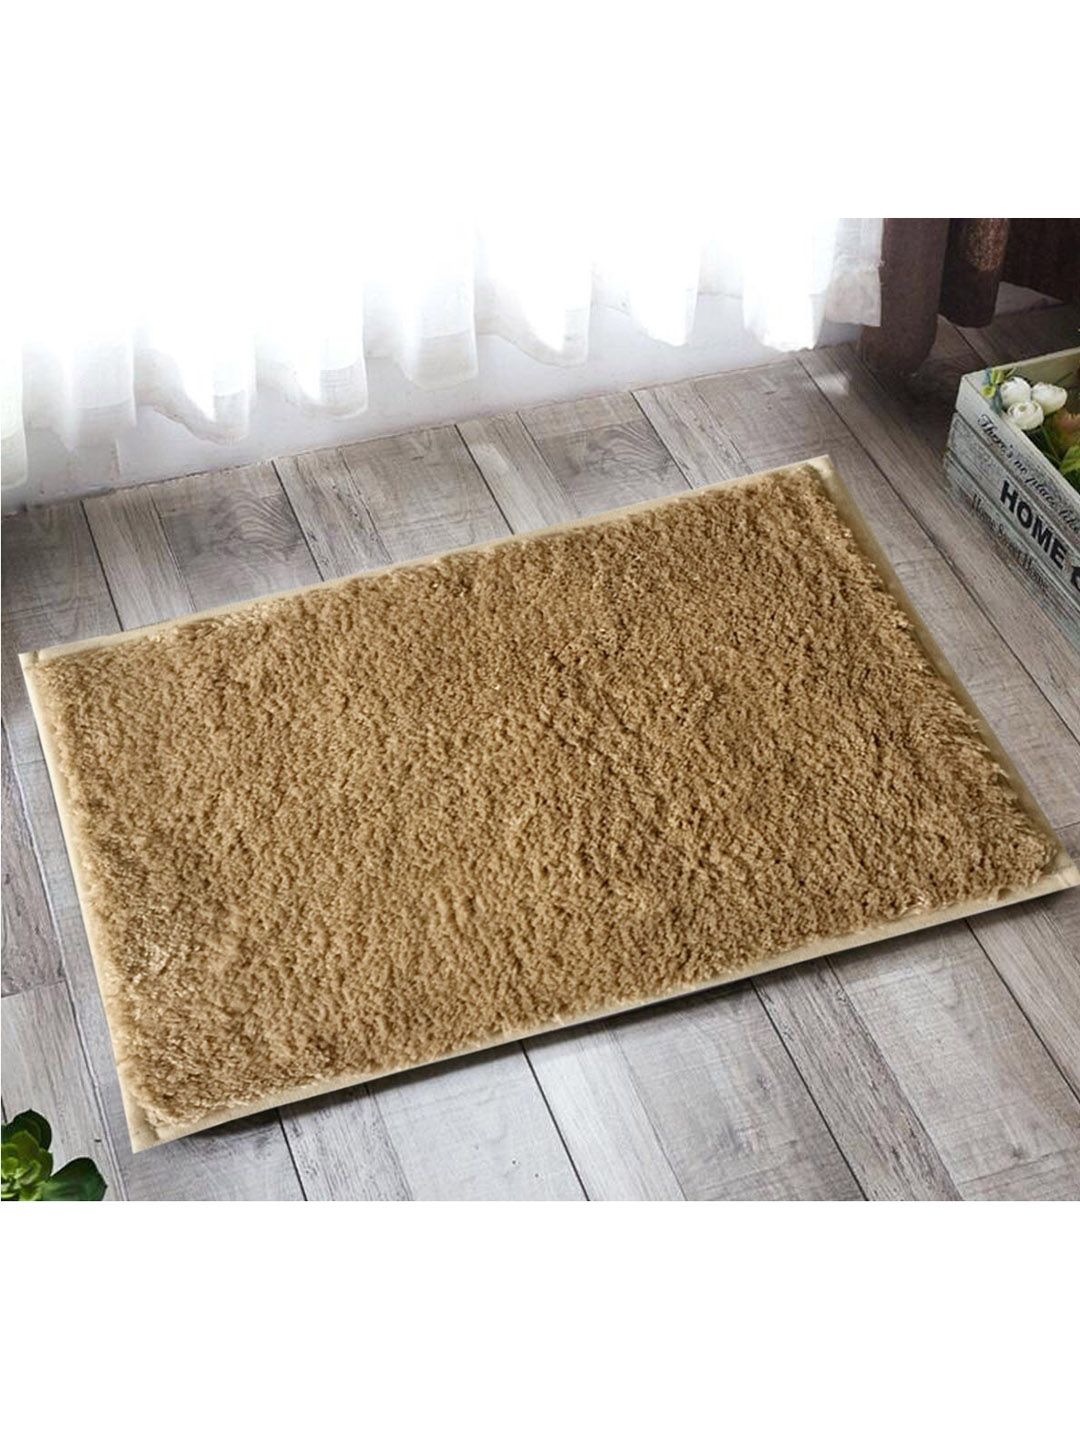 Lushomes Camel Brown Thick & Fluffy 1800 GSM High Pile Microfiber Bath Rug Price in India